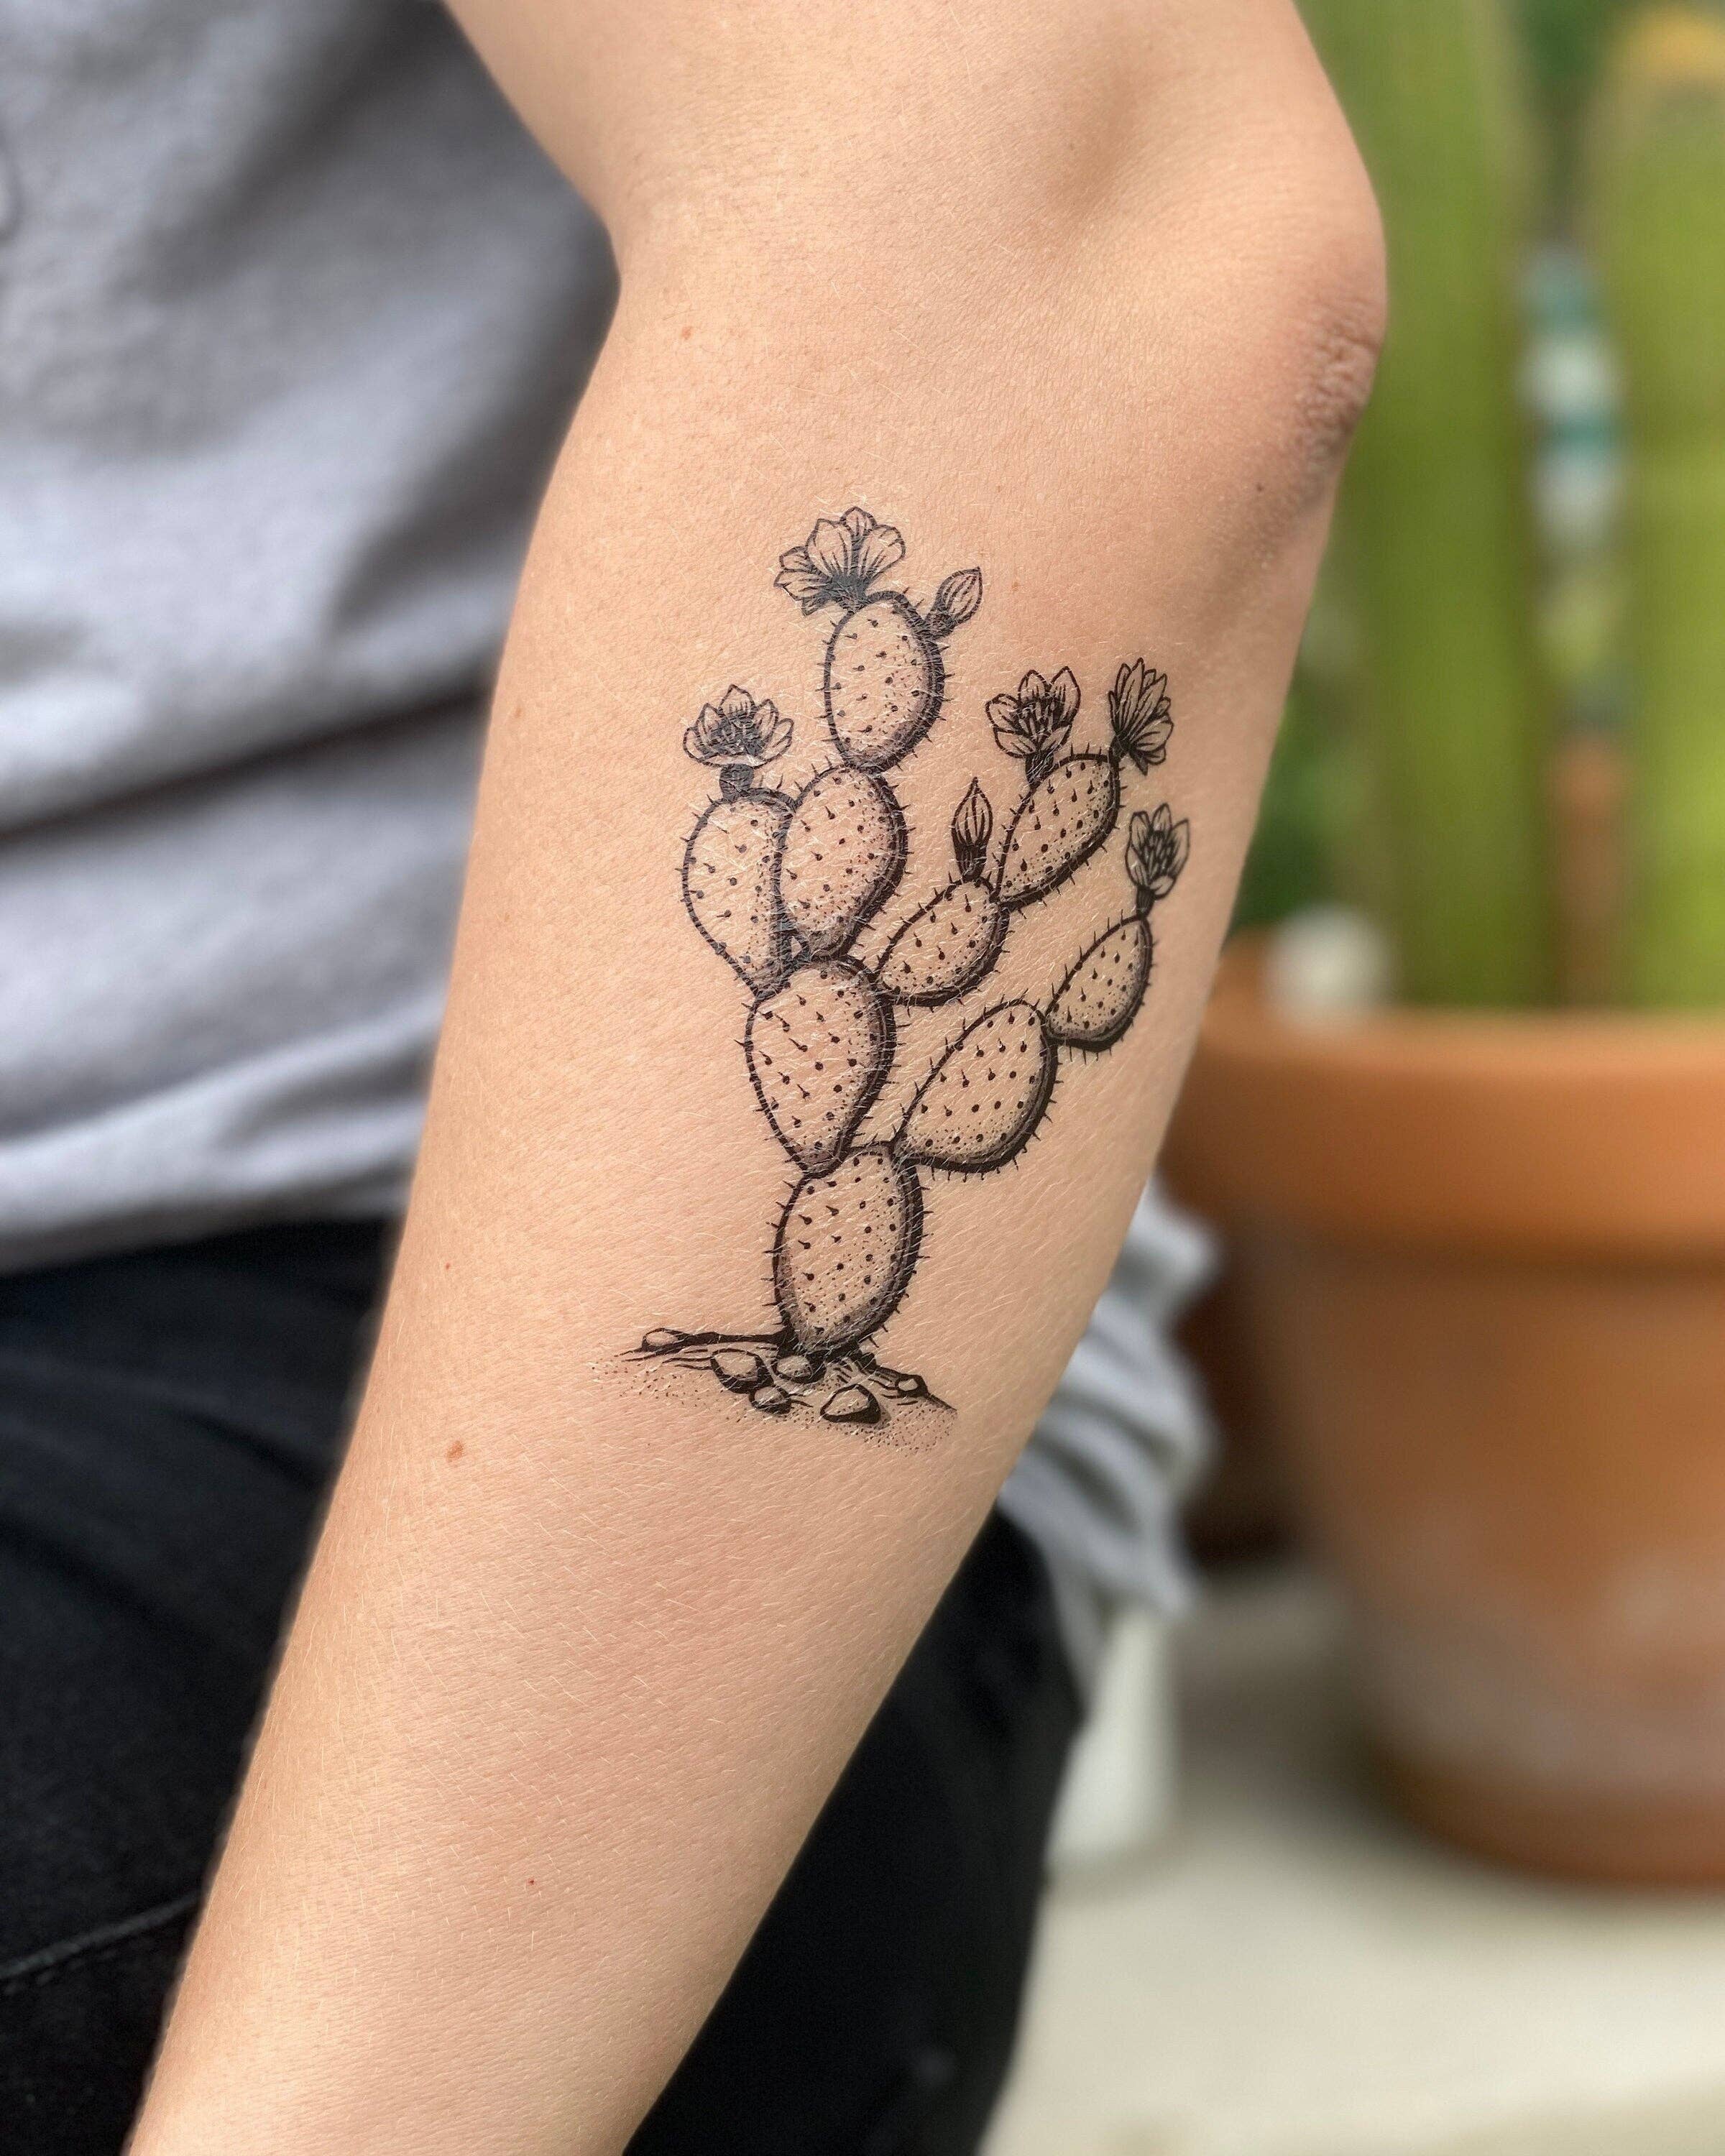 American traditional prickly pear cactus by Charlie at Crimson Hilt Tattoo  in Denver CO  rtattoos